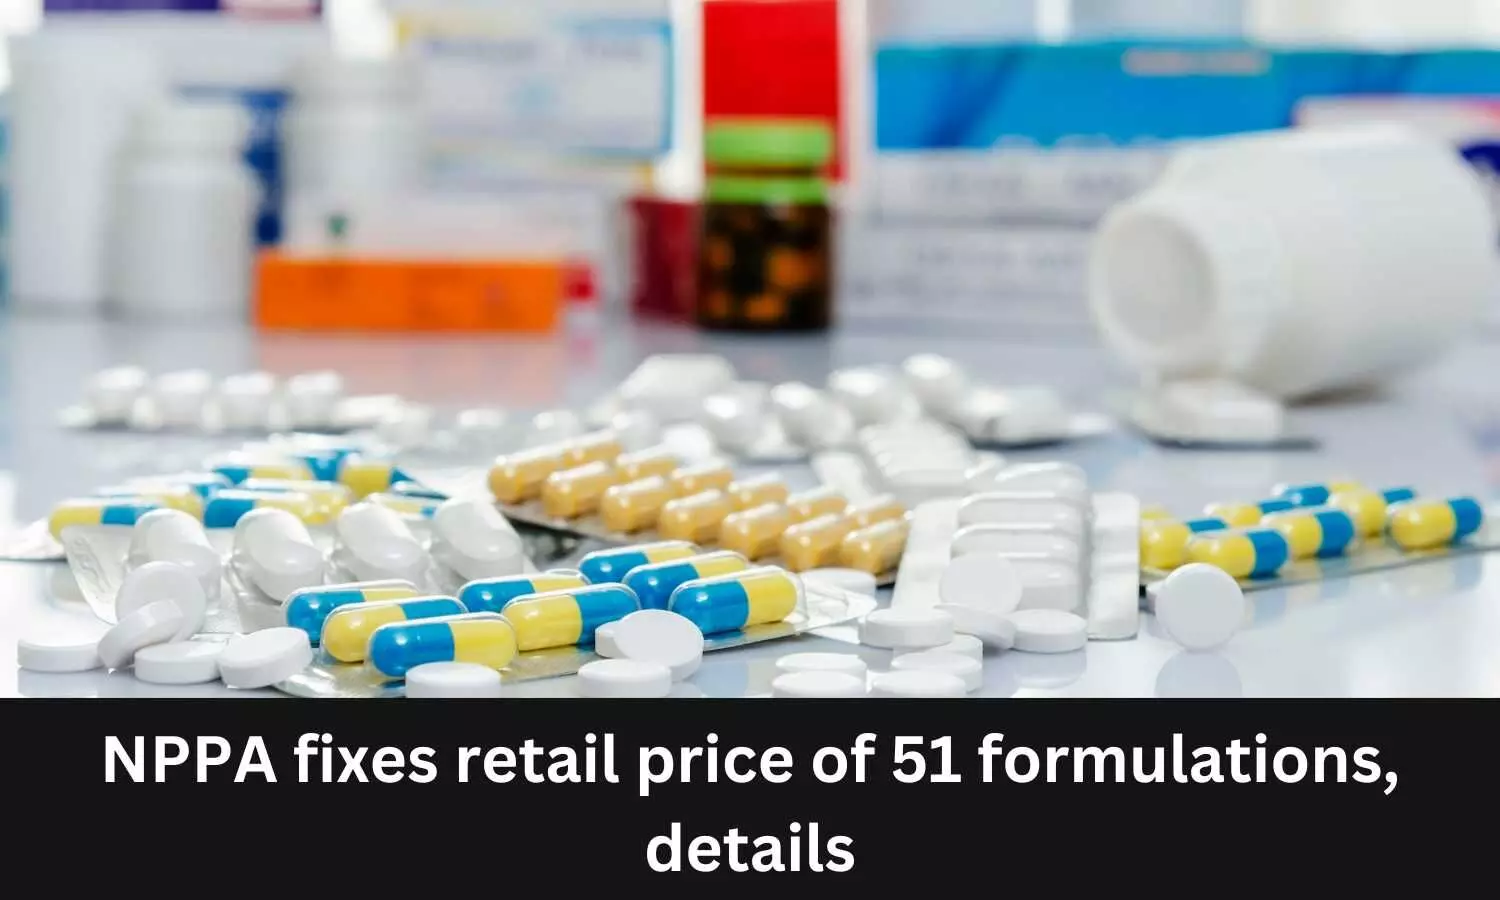 Retail price of 51 formulations fixed by NPPA